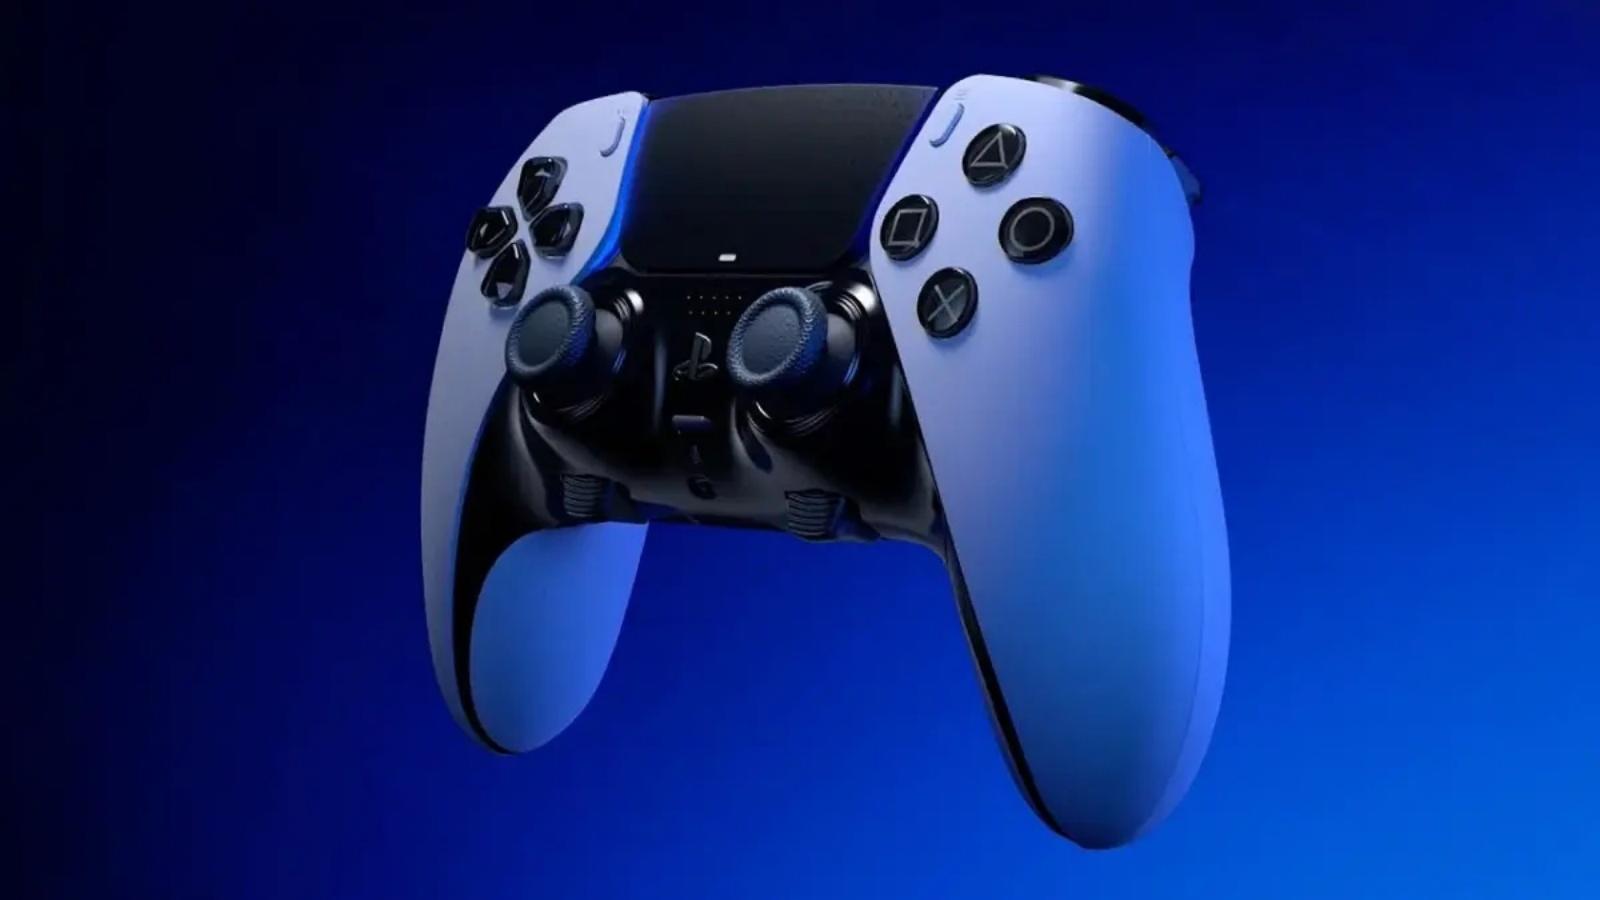 PS5 Pro: When can fans expect the announcement after PS5 Slim model release?